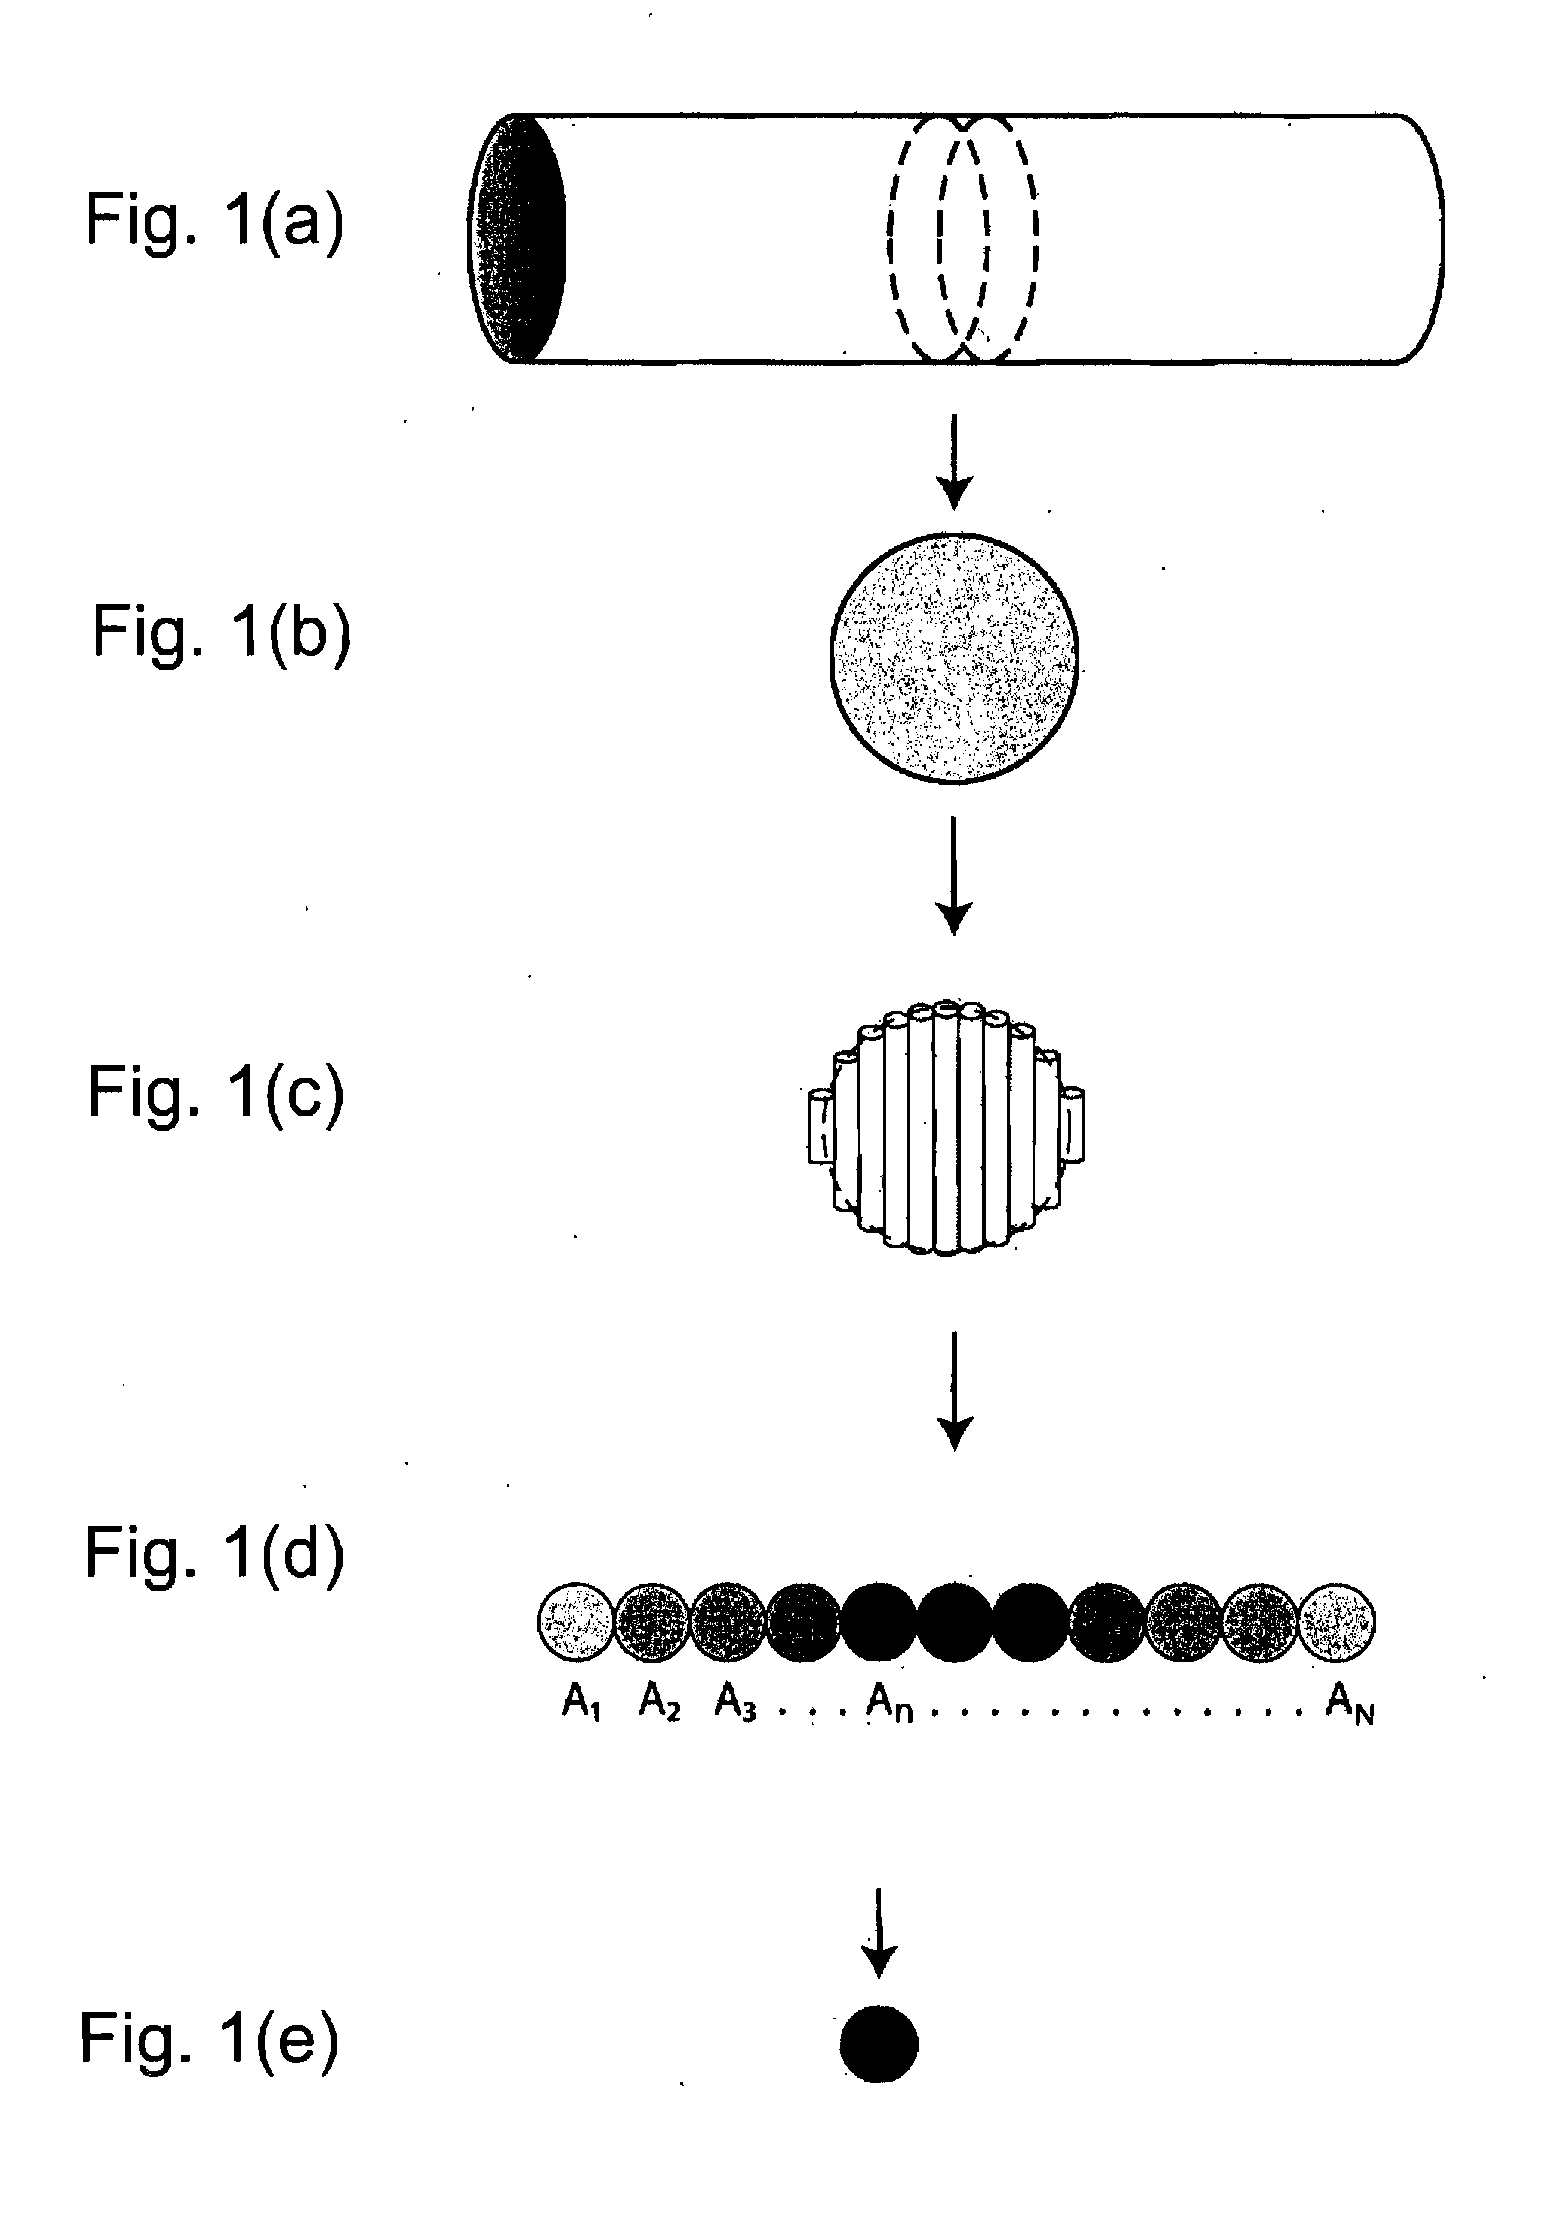 Device and Method for Quantification of Gases in Plumes by Remote Sensing